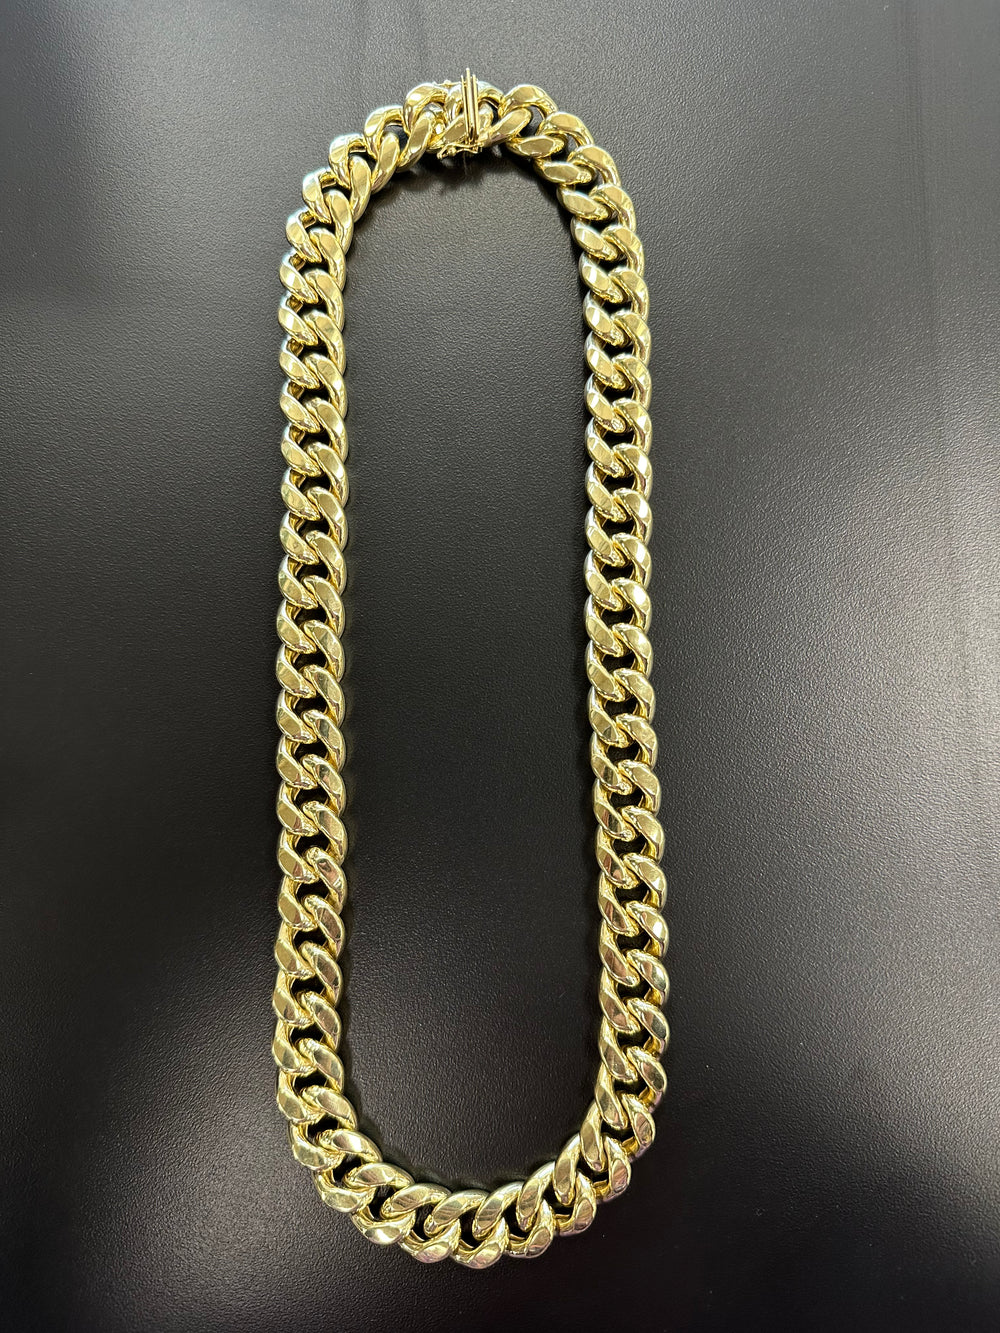 15mm Cuban Necklace in 10k Yellow Gold